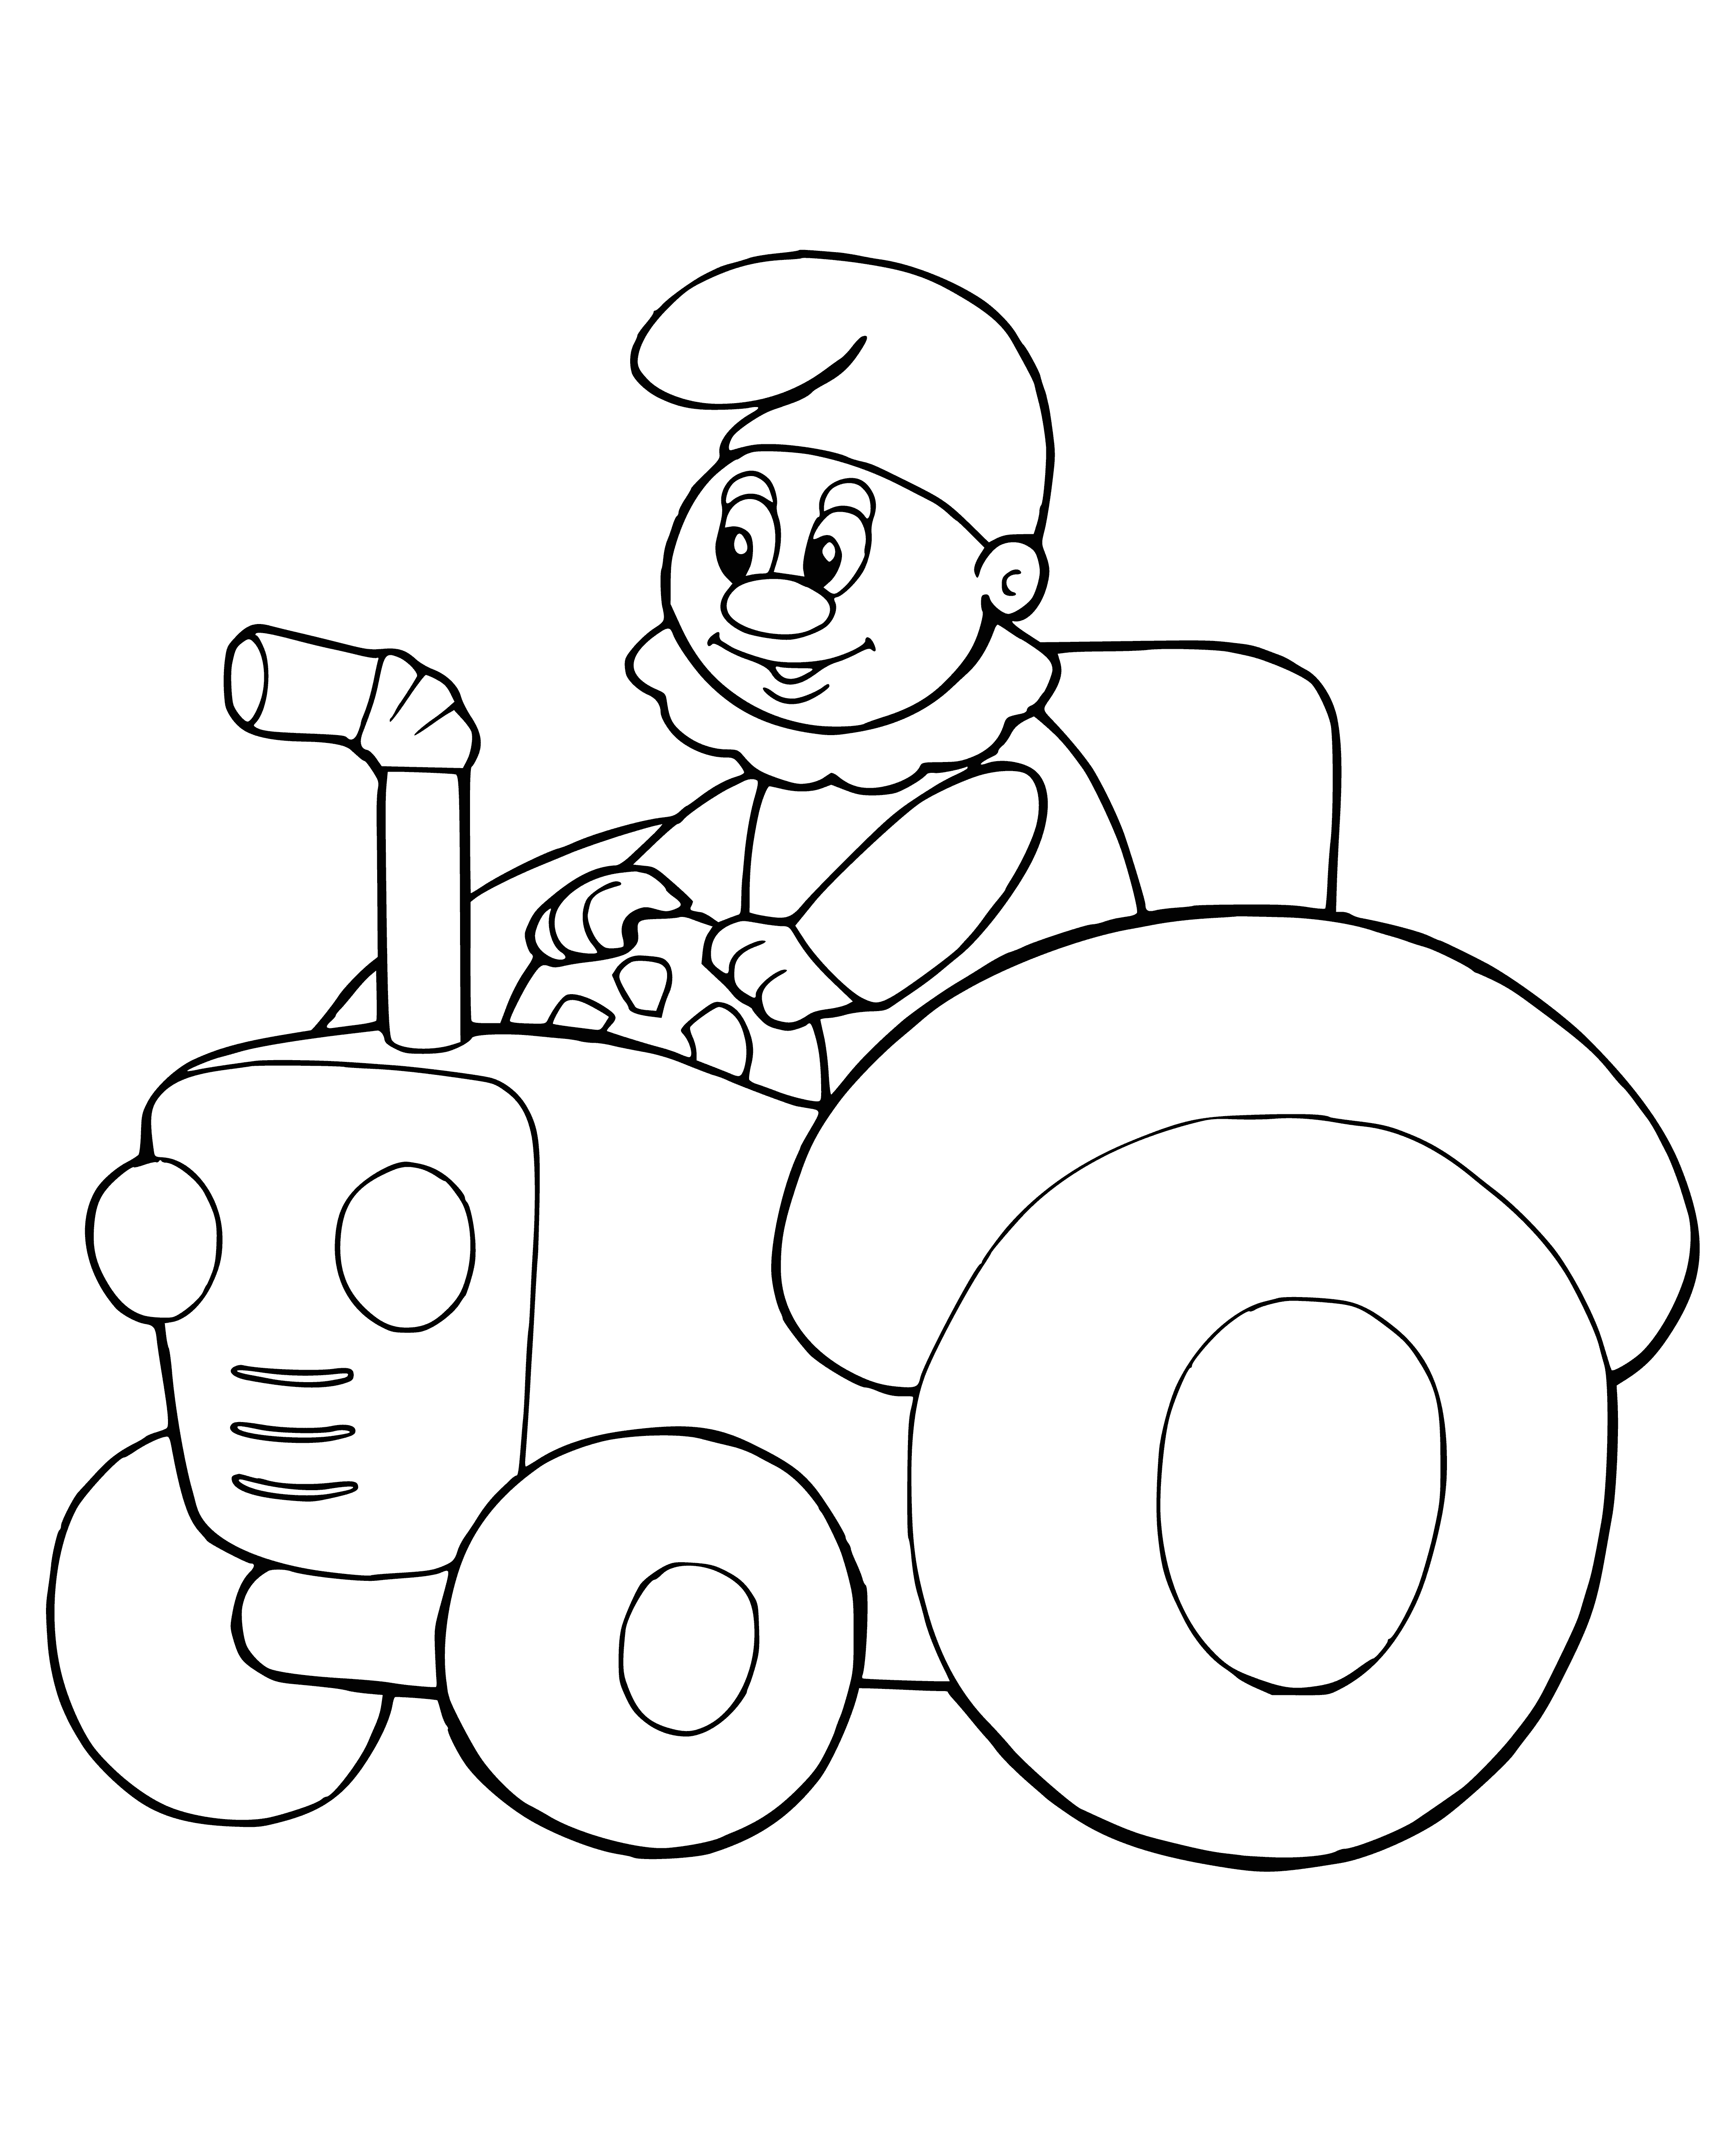 coloring page: This blue toy tractor has a yellow cab, grey bucket, and black tires. #toytractor